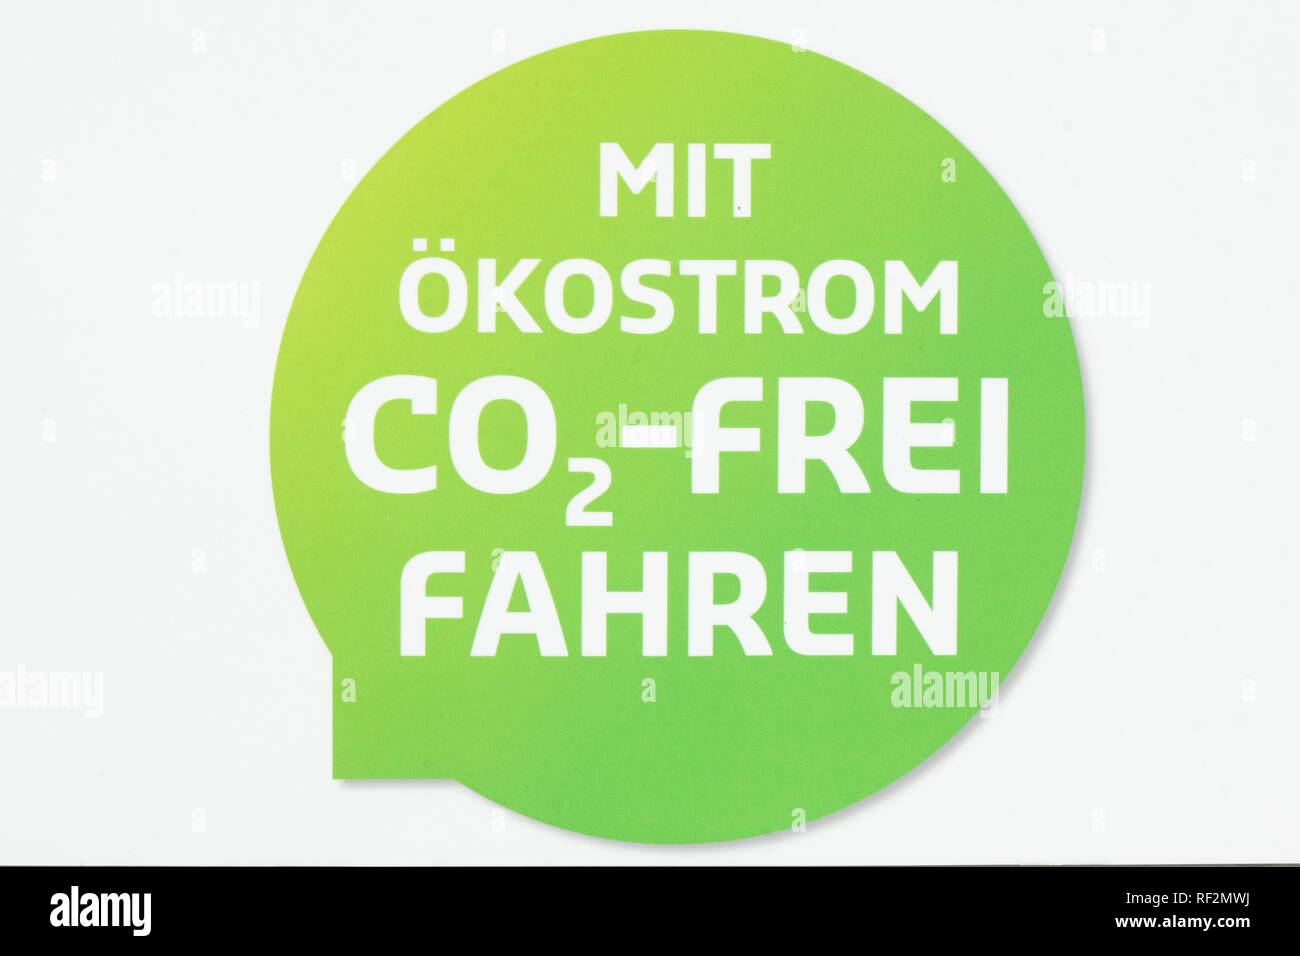 Pictogram with green electricity CO2 free driving at a charging station for electric cars, Germany Stock Photo